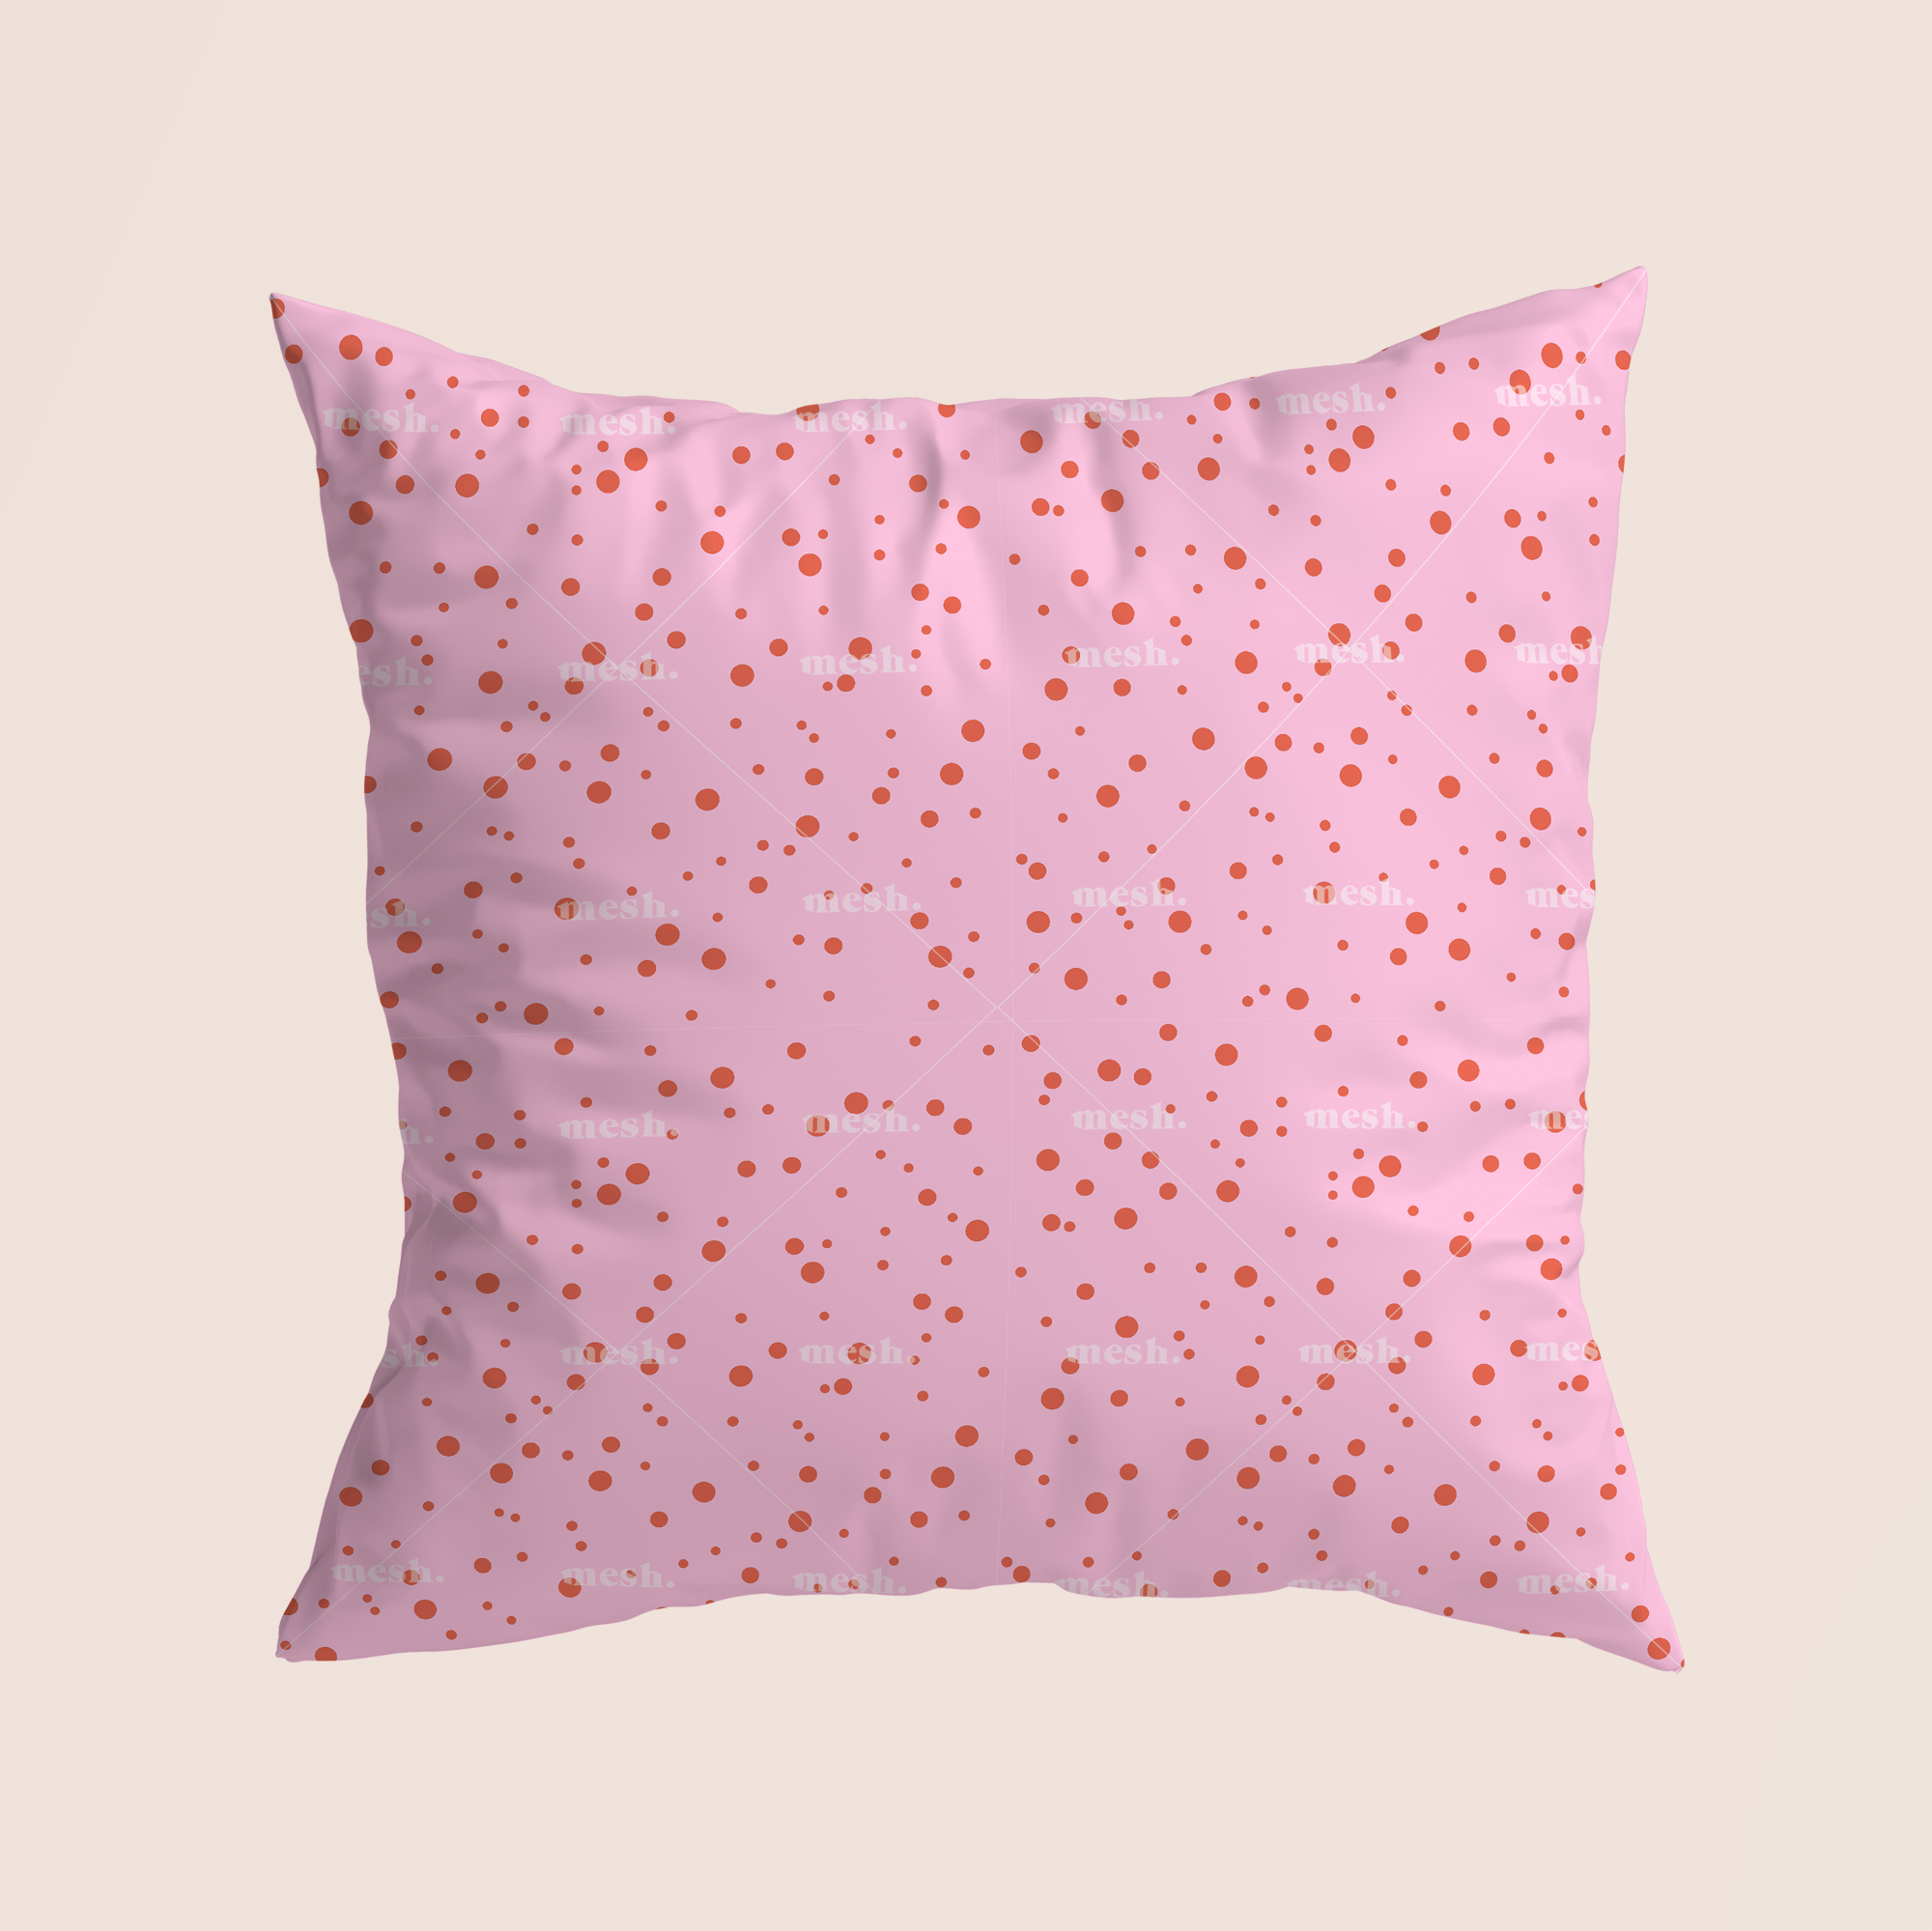 Infinite dots pink in red pattern design printed on recycled fabric canvas mockup